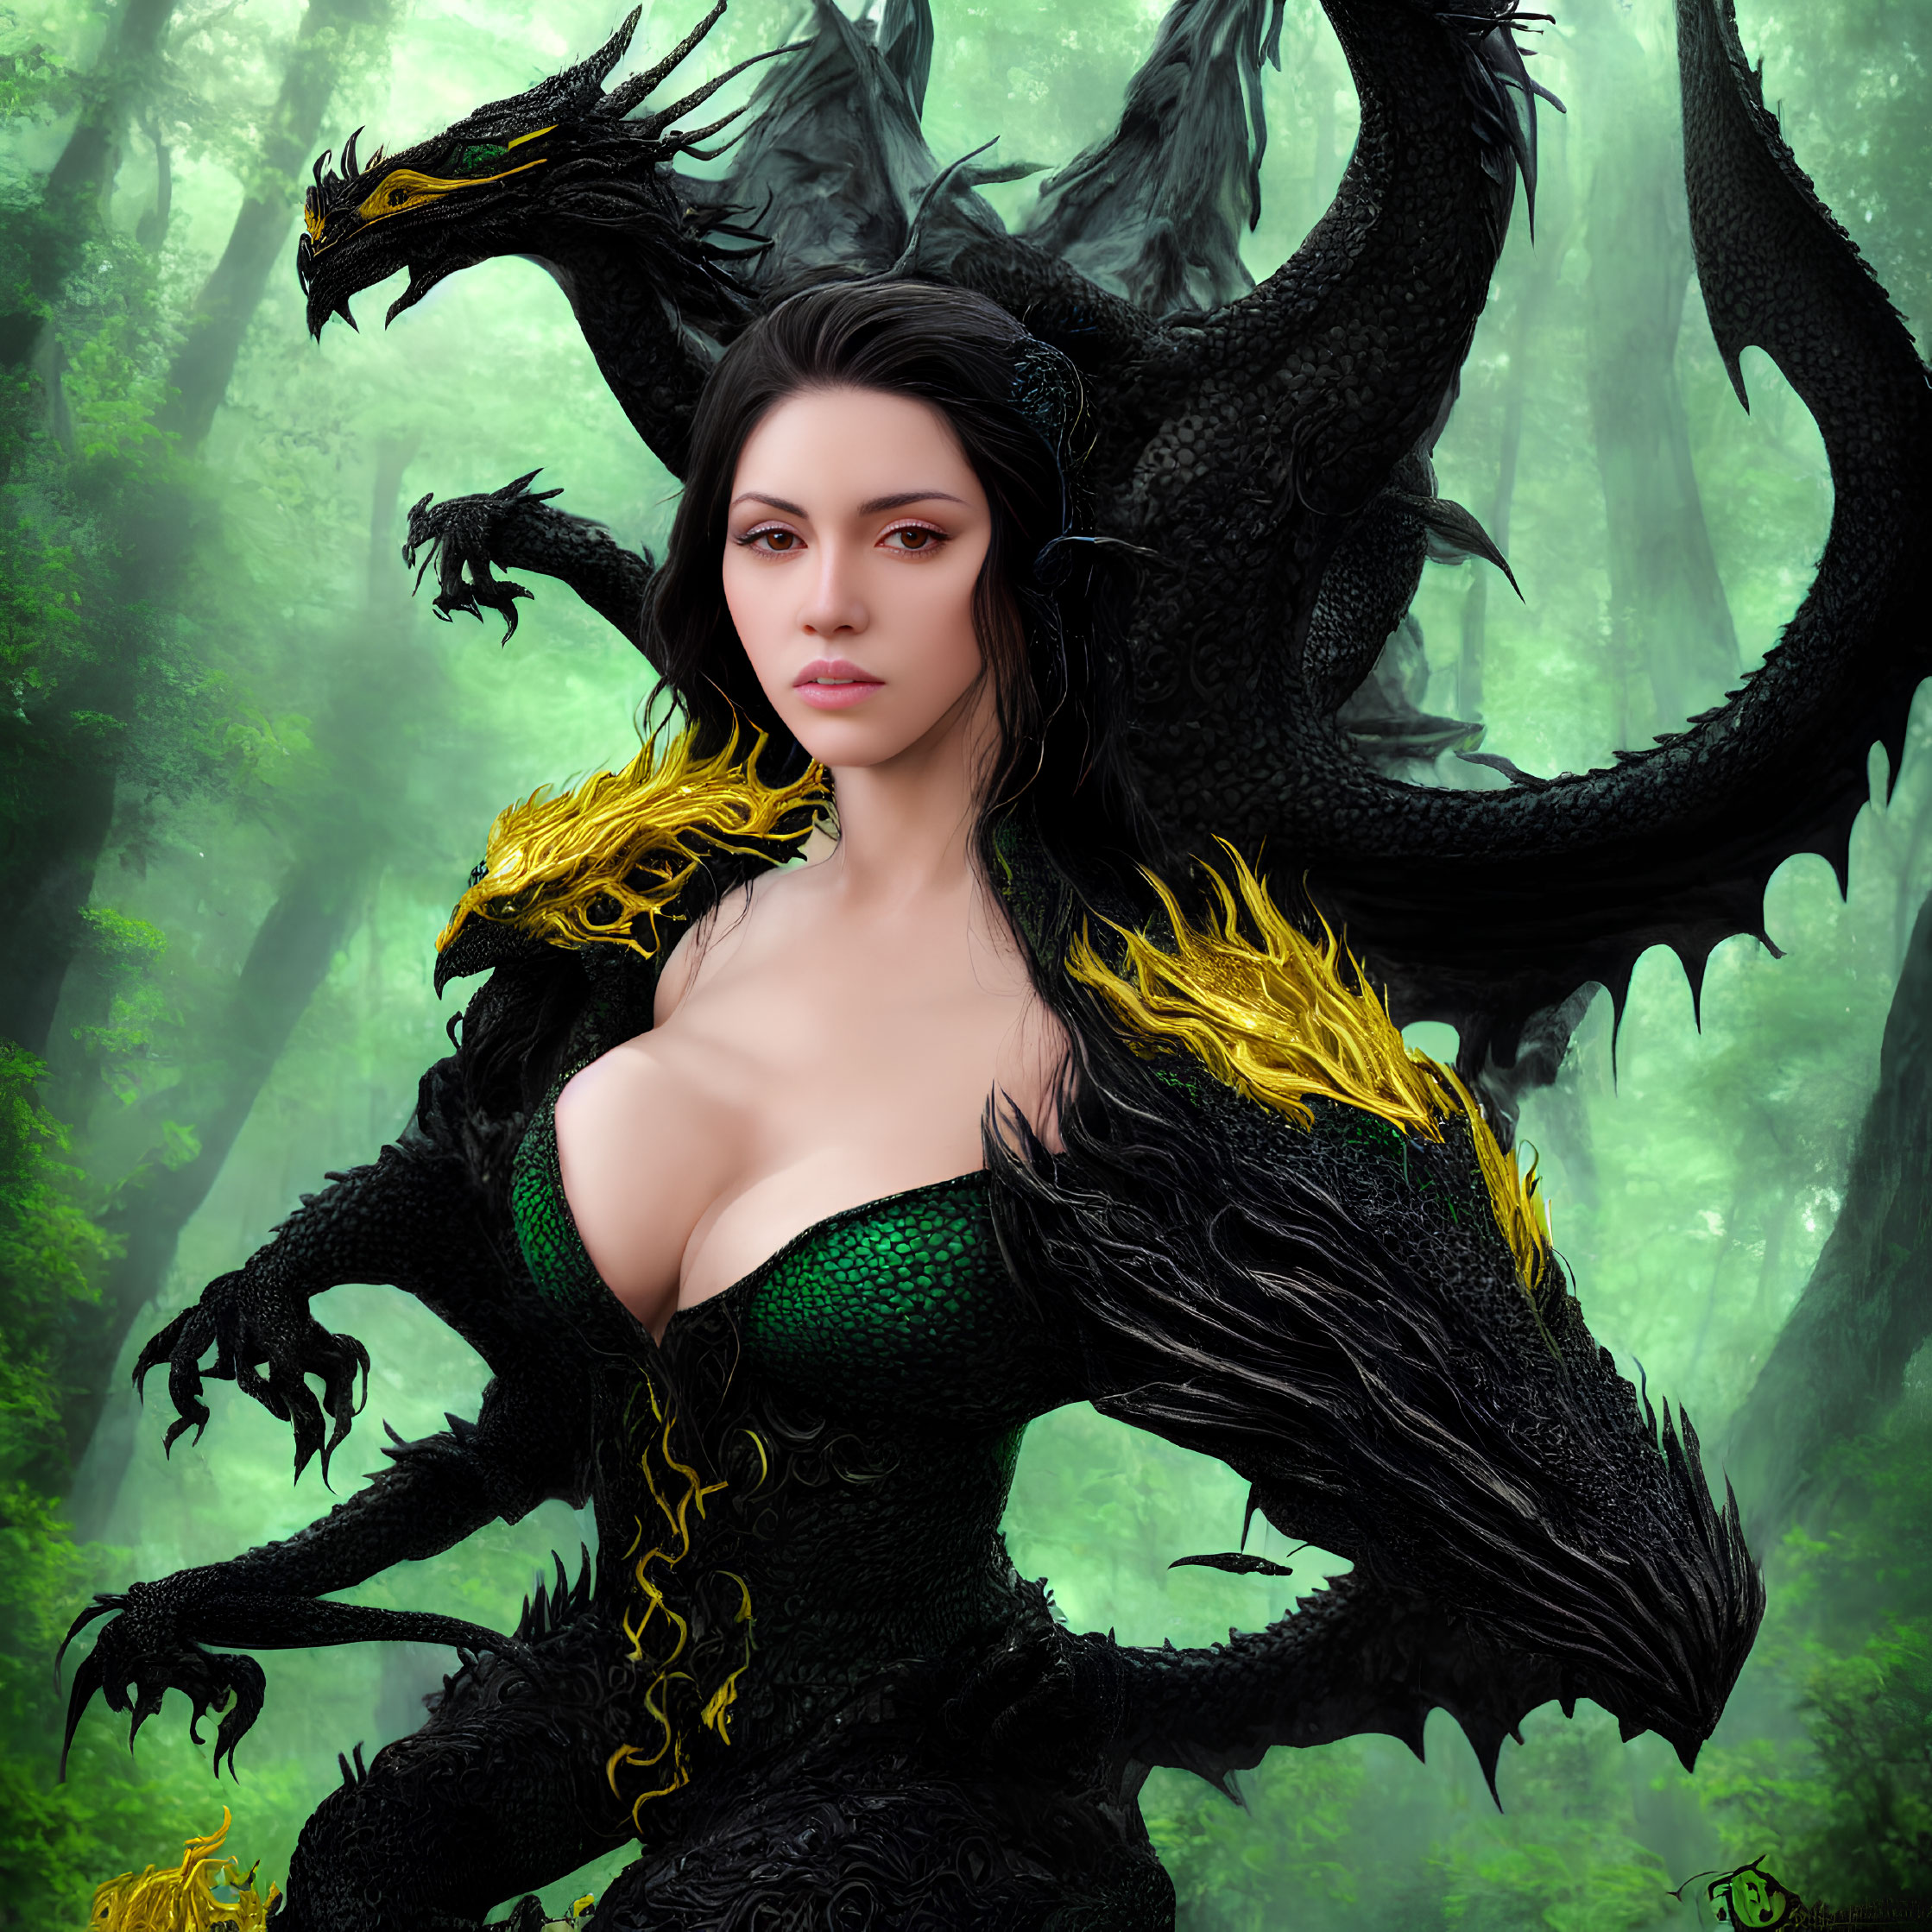 Dark-haired woman and dragon in mystical forest setting.